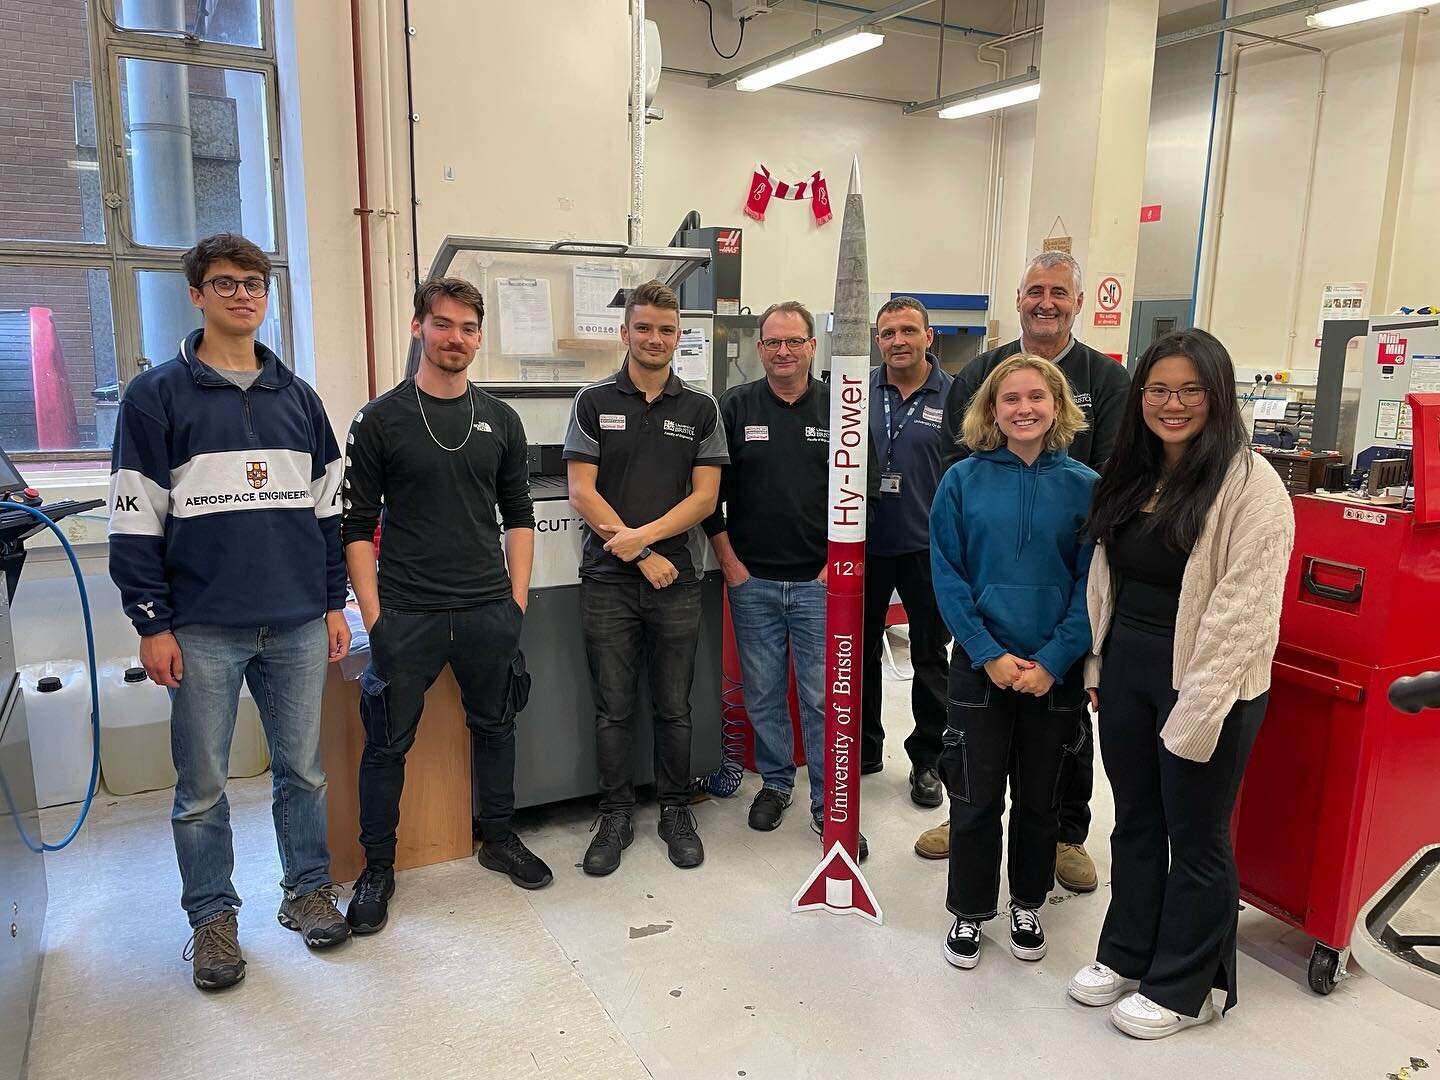 Our project could not have happened without the support of @bristolengineering technical staff. 

Massive thanks to the Richard, Archie, Rich, and Jack from the mechanical workshop; Terry from student bay; Matt from AVDASI lab; Willow from GE lab and